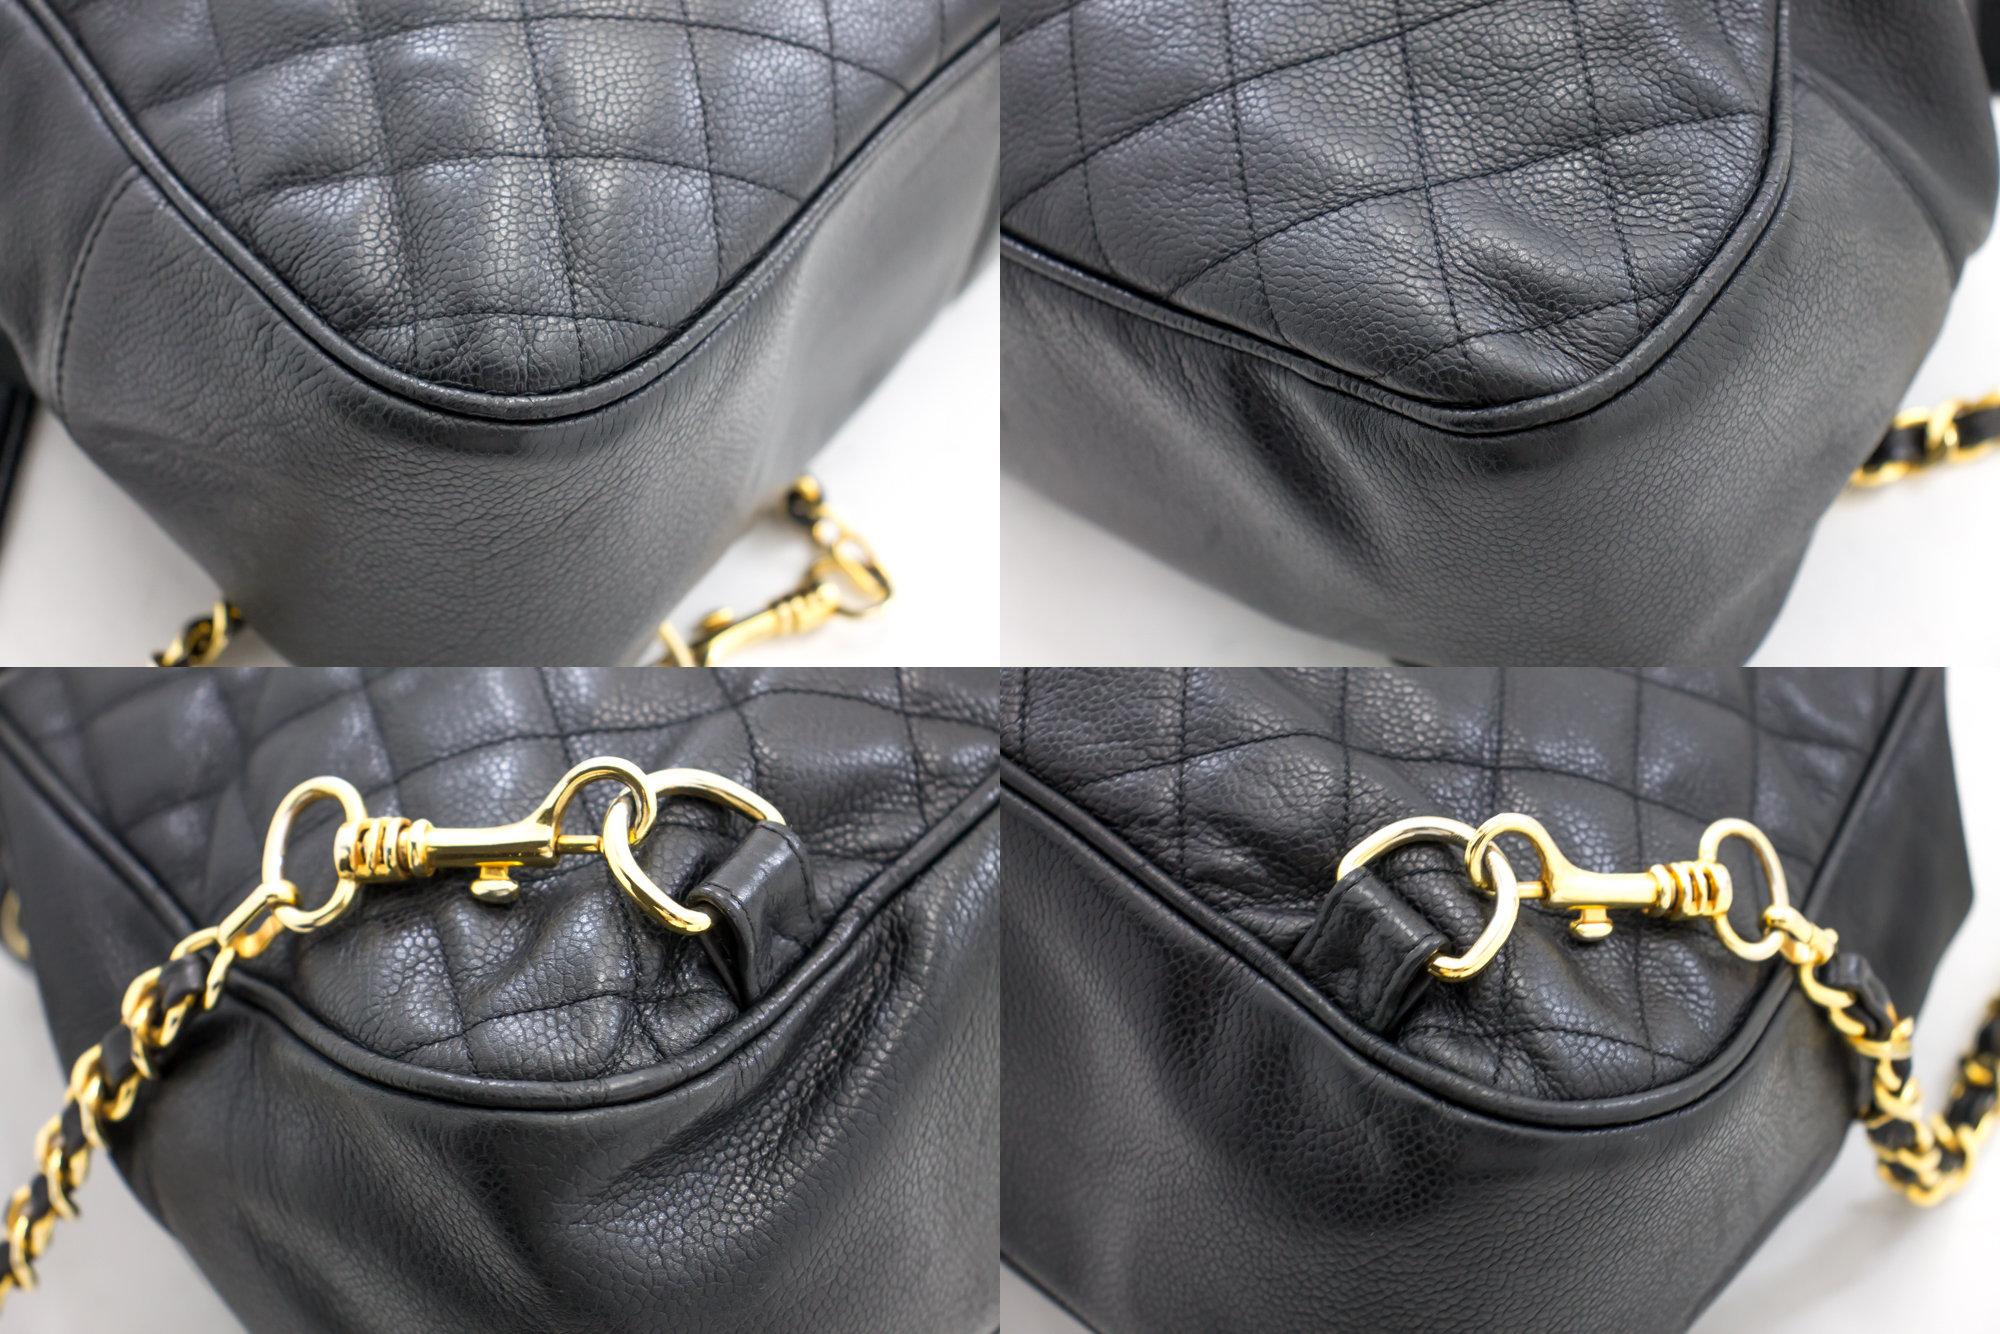 CHANEL Caviar Backpack Chain Bag Leather Black Flap Gold Hardware 1